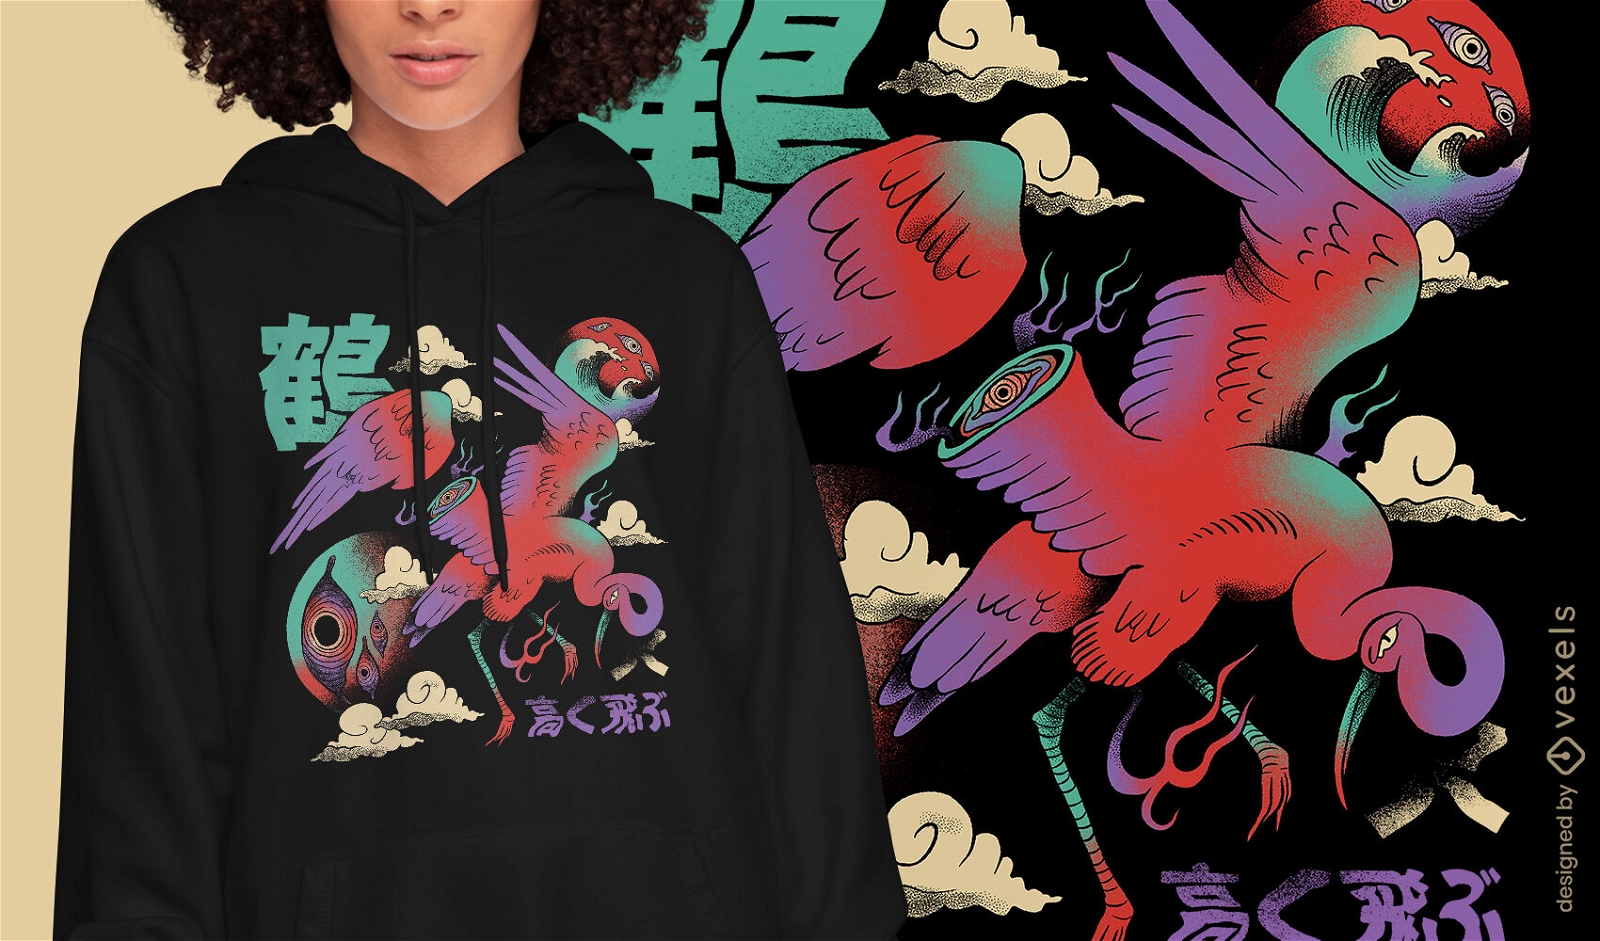 Bird in japanese psychedelic t-shirt design